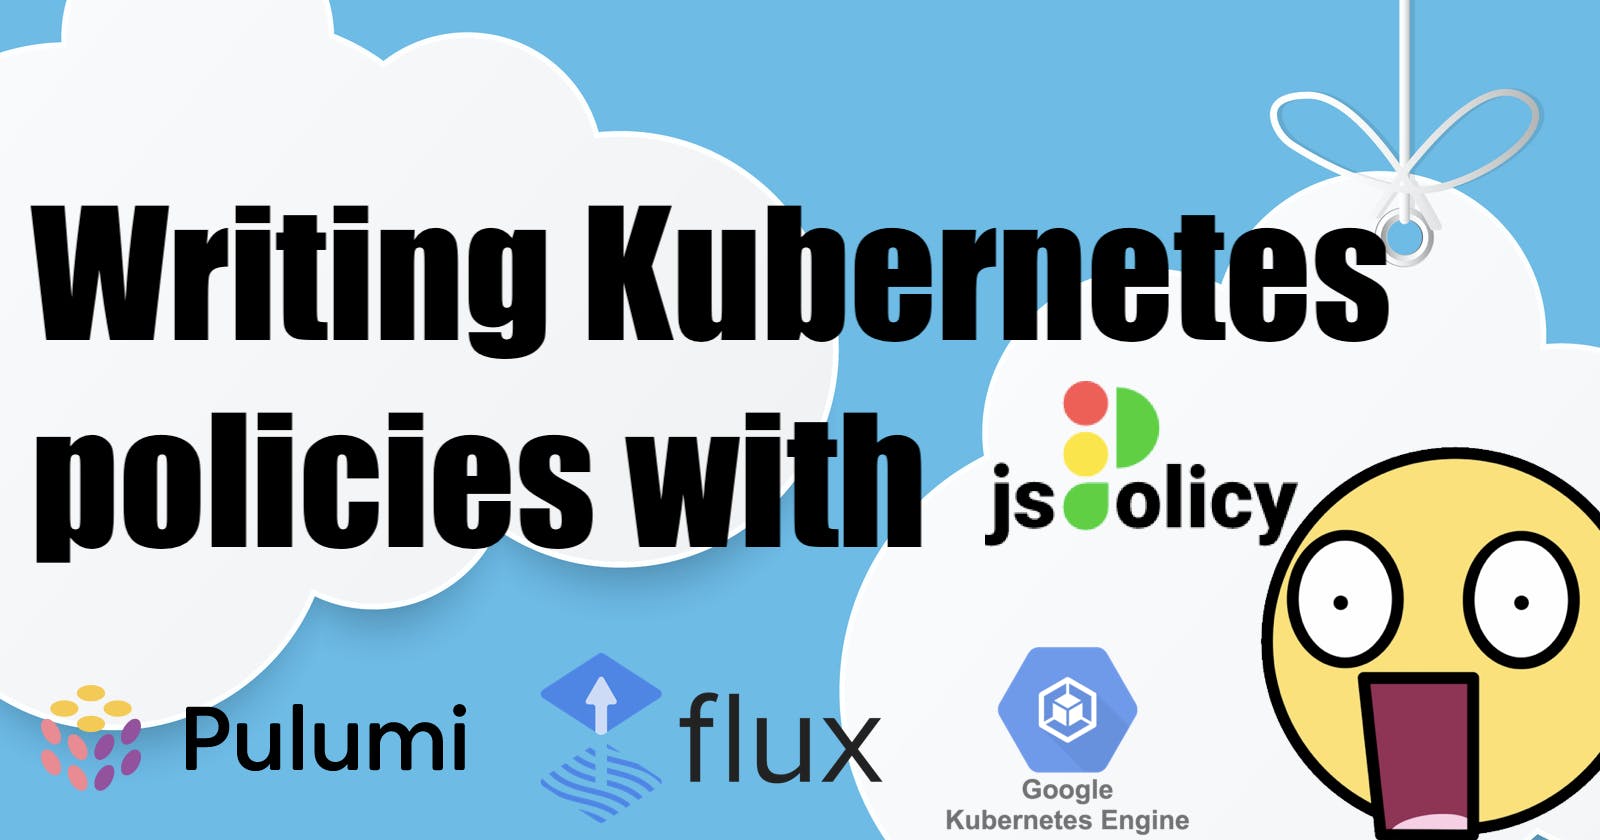 Writing Kubernetes policies with jsPolicy